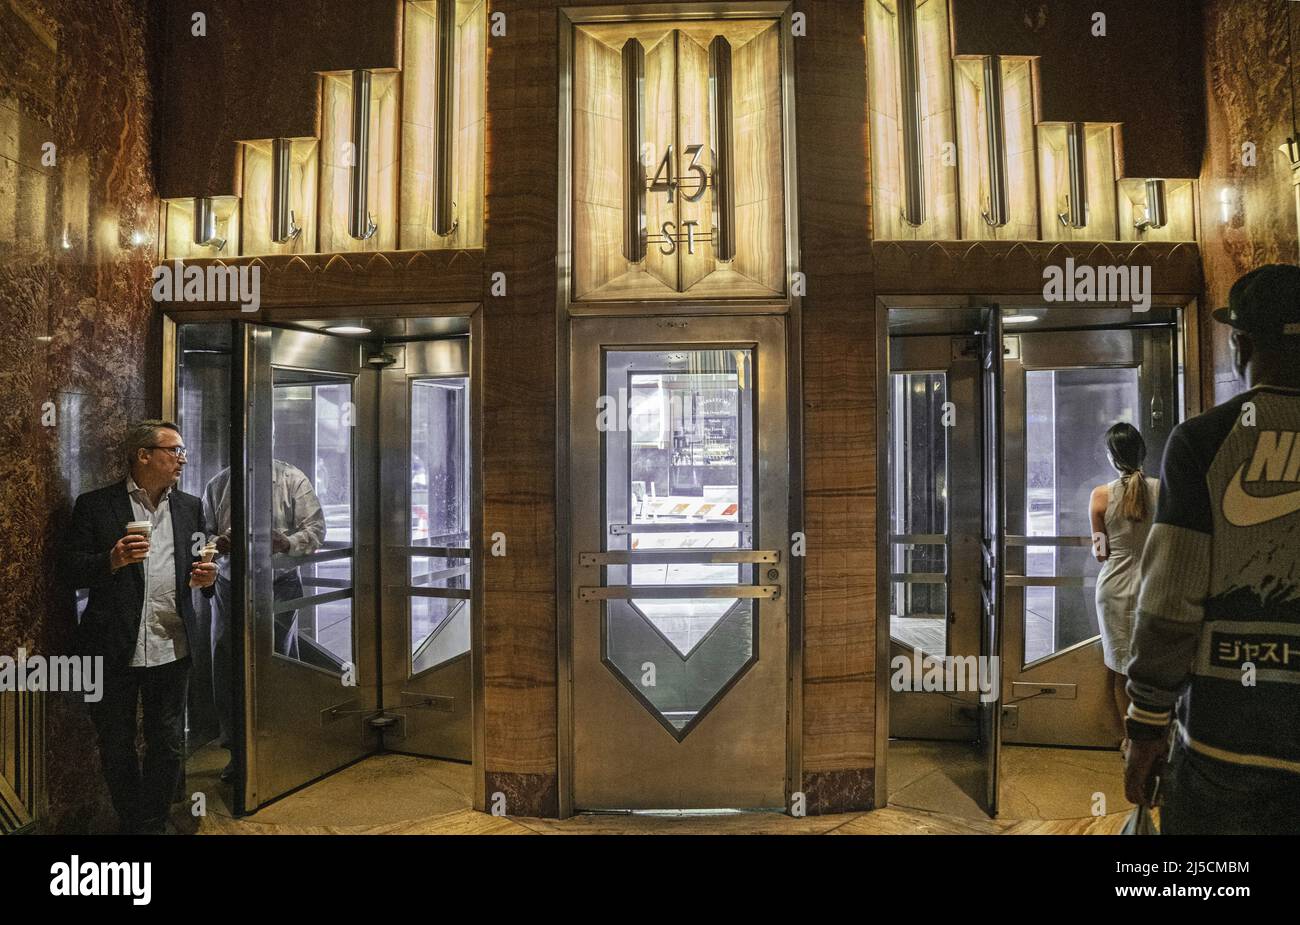 USA, New York, Sept. 24, 2019. Foyer of the Chrysler Building in Manhattan on Sept. 24, 2019. The Chrysler Building is a skyscraper in New York City and is one of the landmarks of the metropolis. Built for the Chrysler Corporation between 1928 and 1930, the building was designed in the Art Deco style by architect William Van Alen. It is one of the most beautiful skyscrapers of that era. [automated translation] Stock Photo